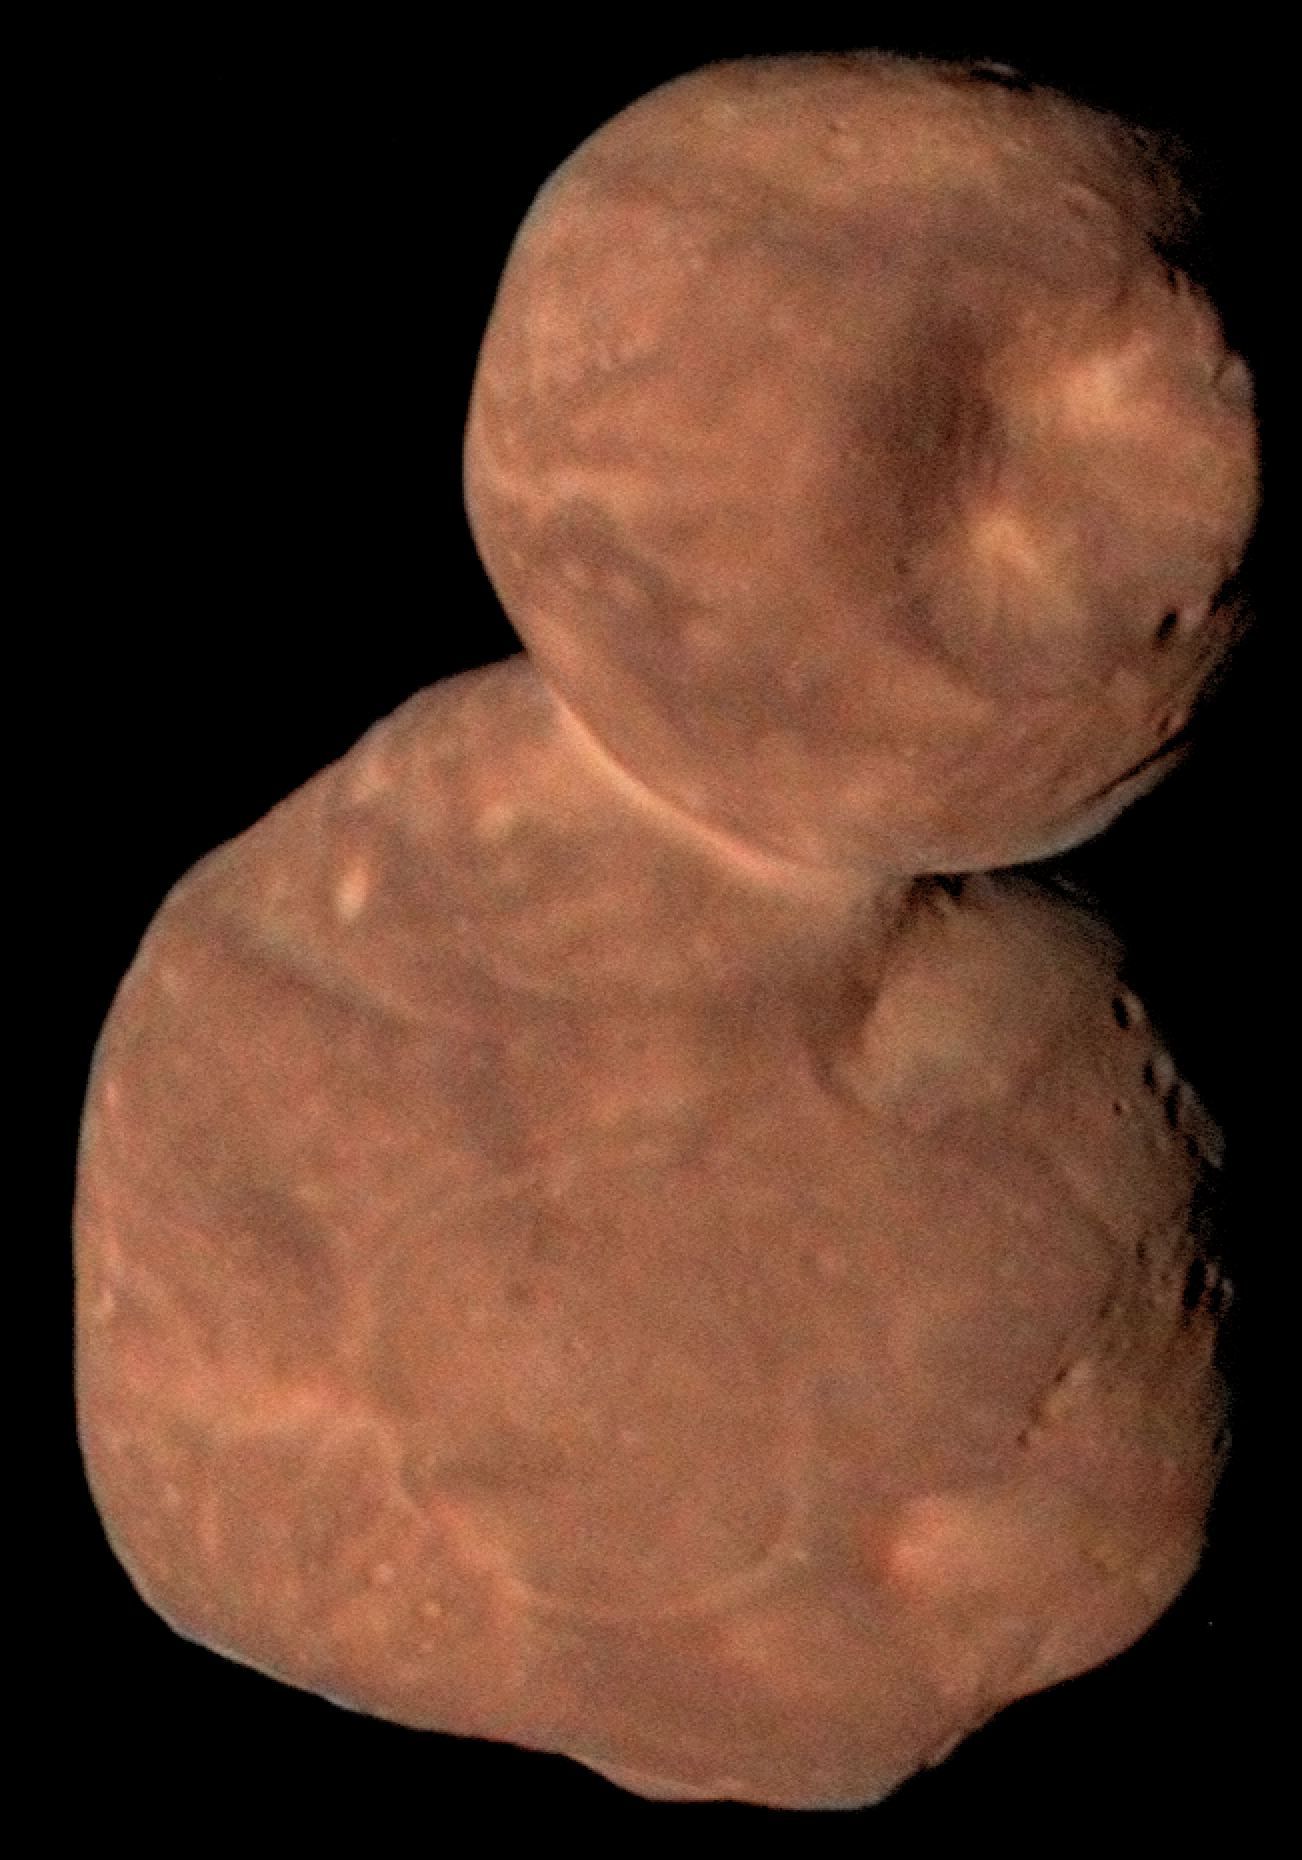 Arrokoth was photographed by the New Horizons spacecraft in December 2018 and January 2019.